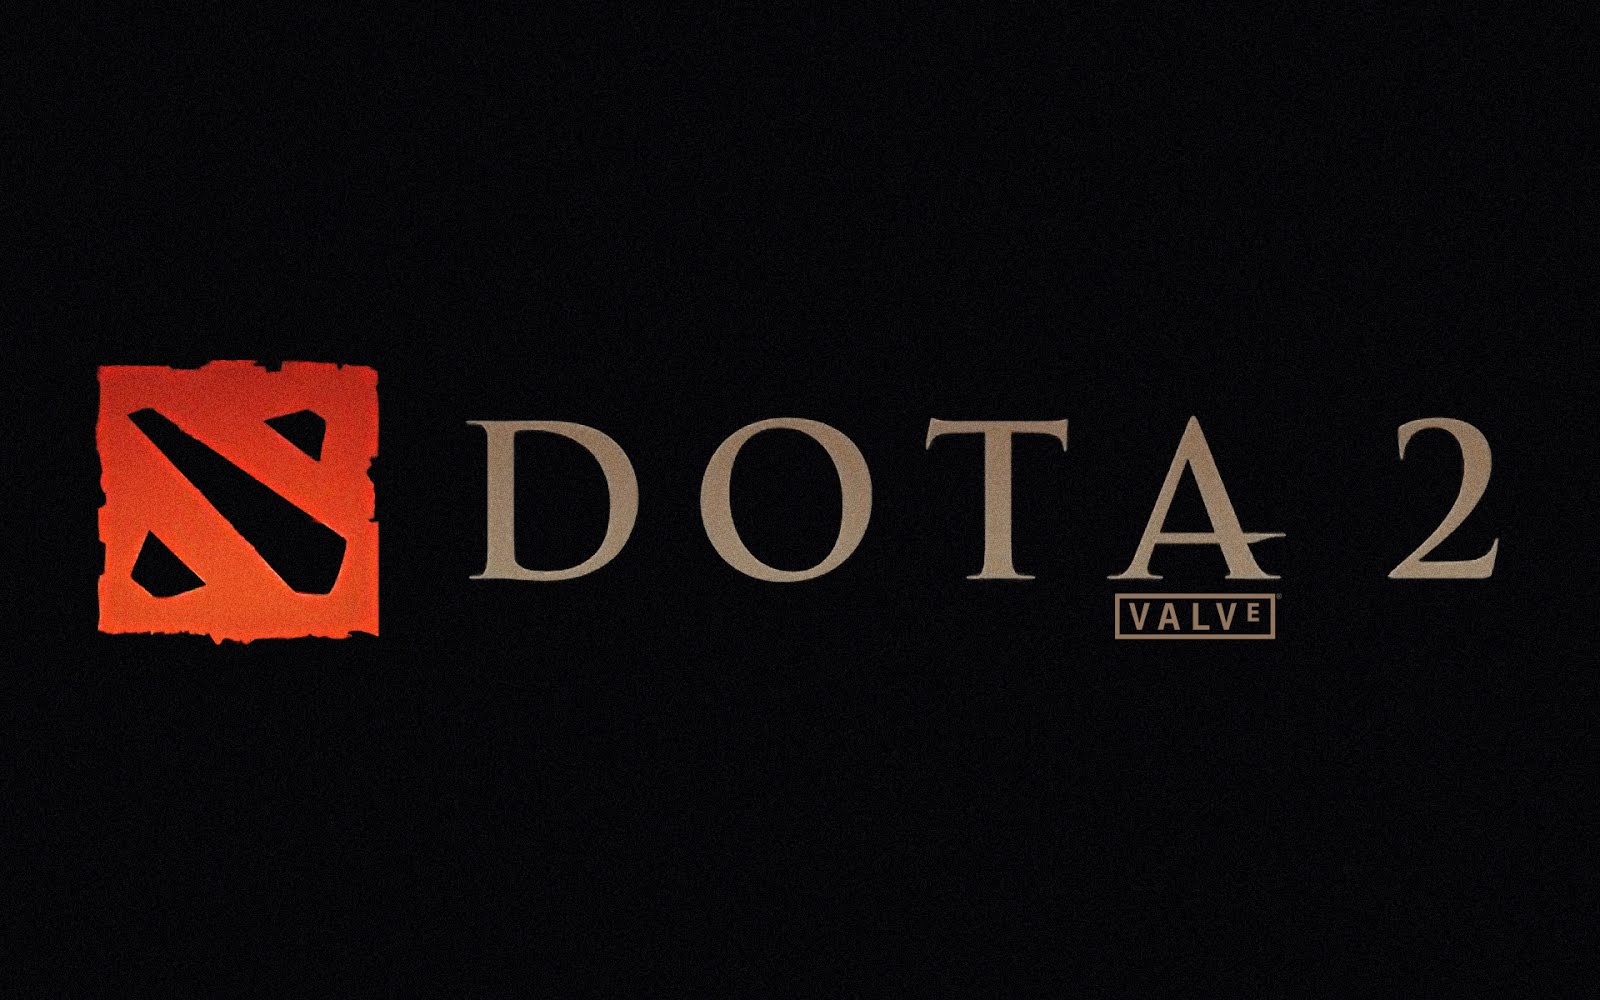 About DOTA